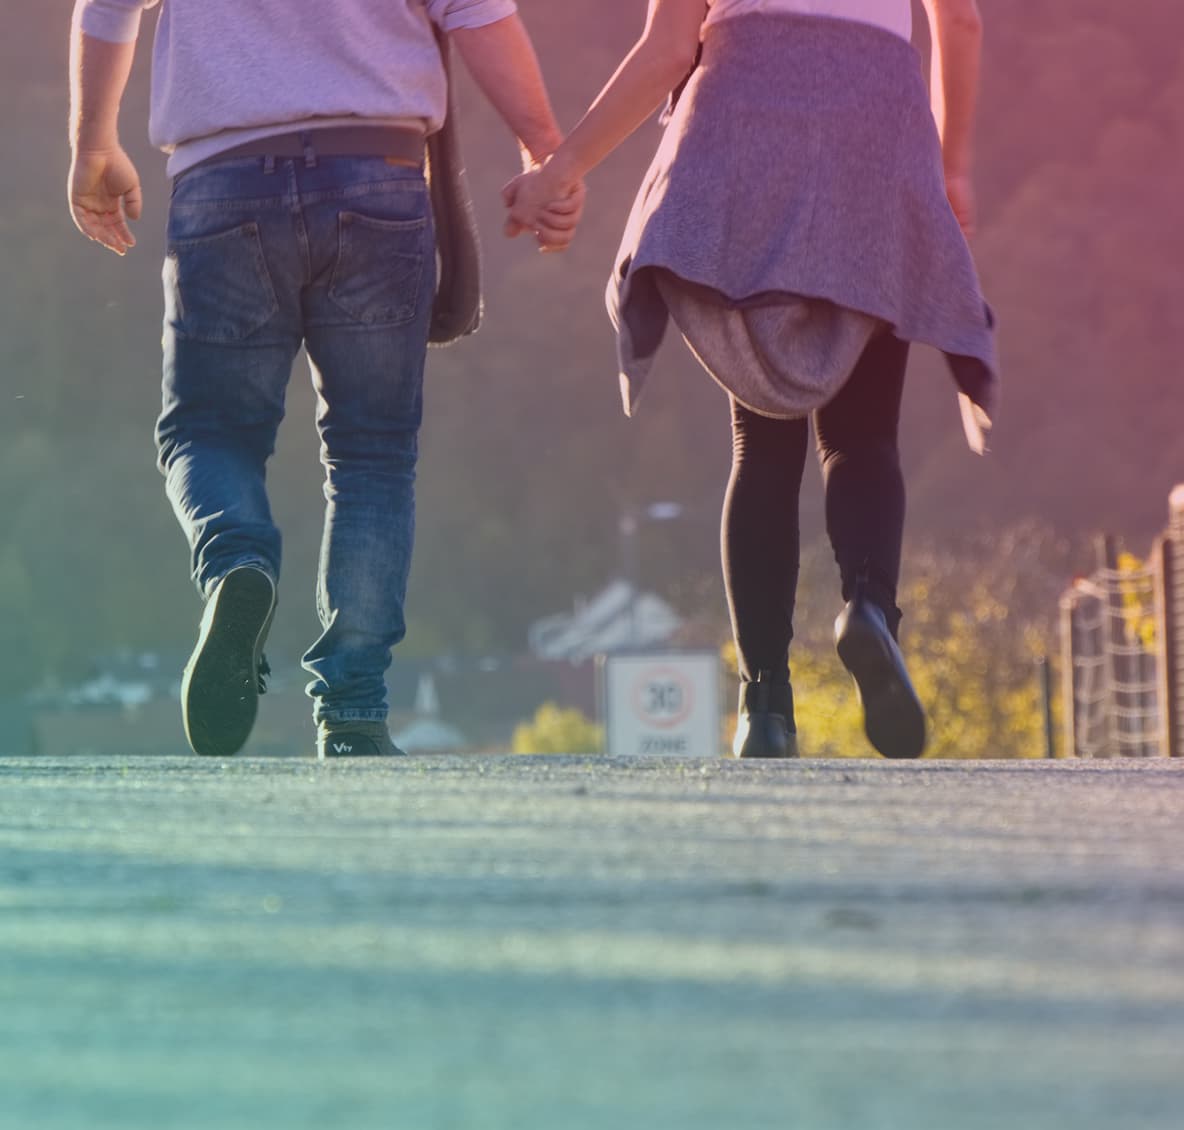 A couple walking down a road holding hands